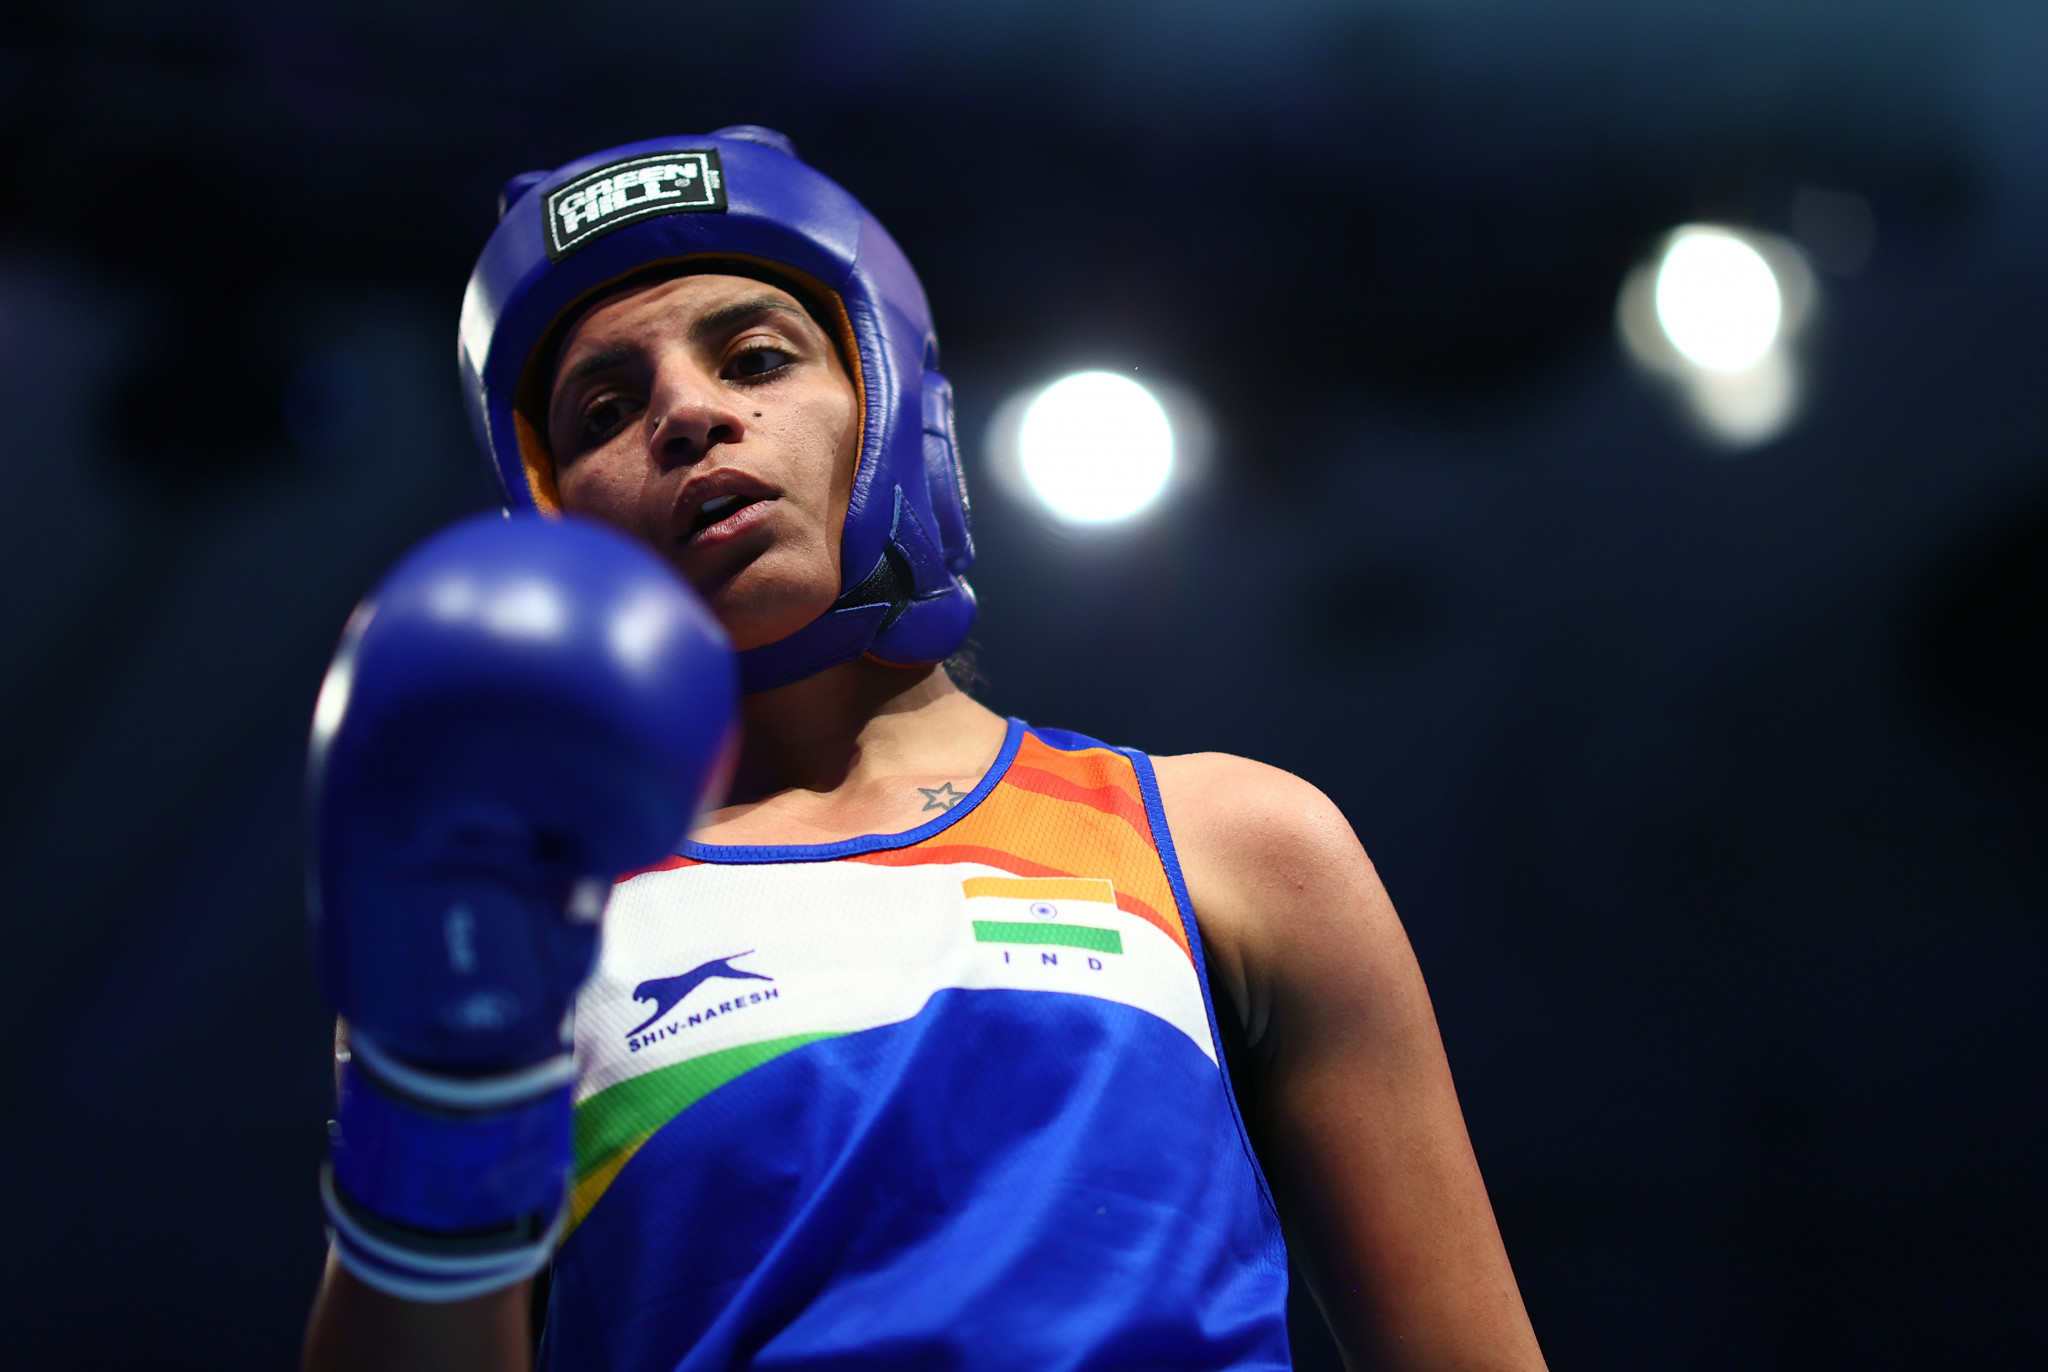 New Indian boxing high-performance director encouraged heading to Paris 2024